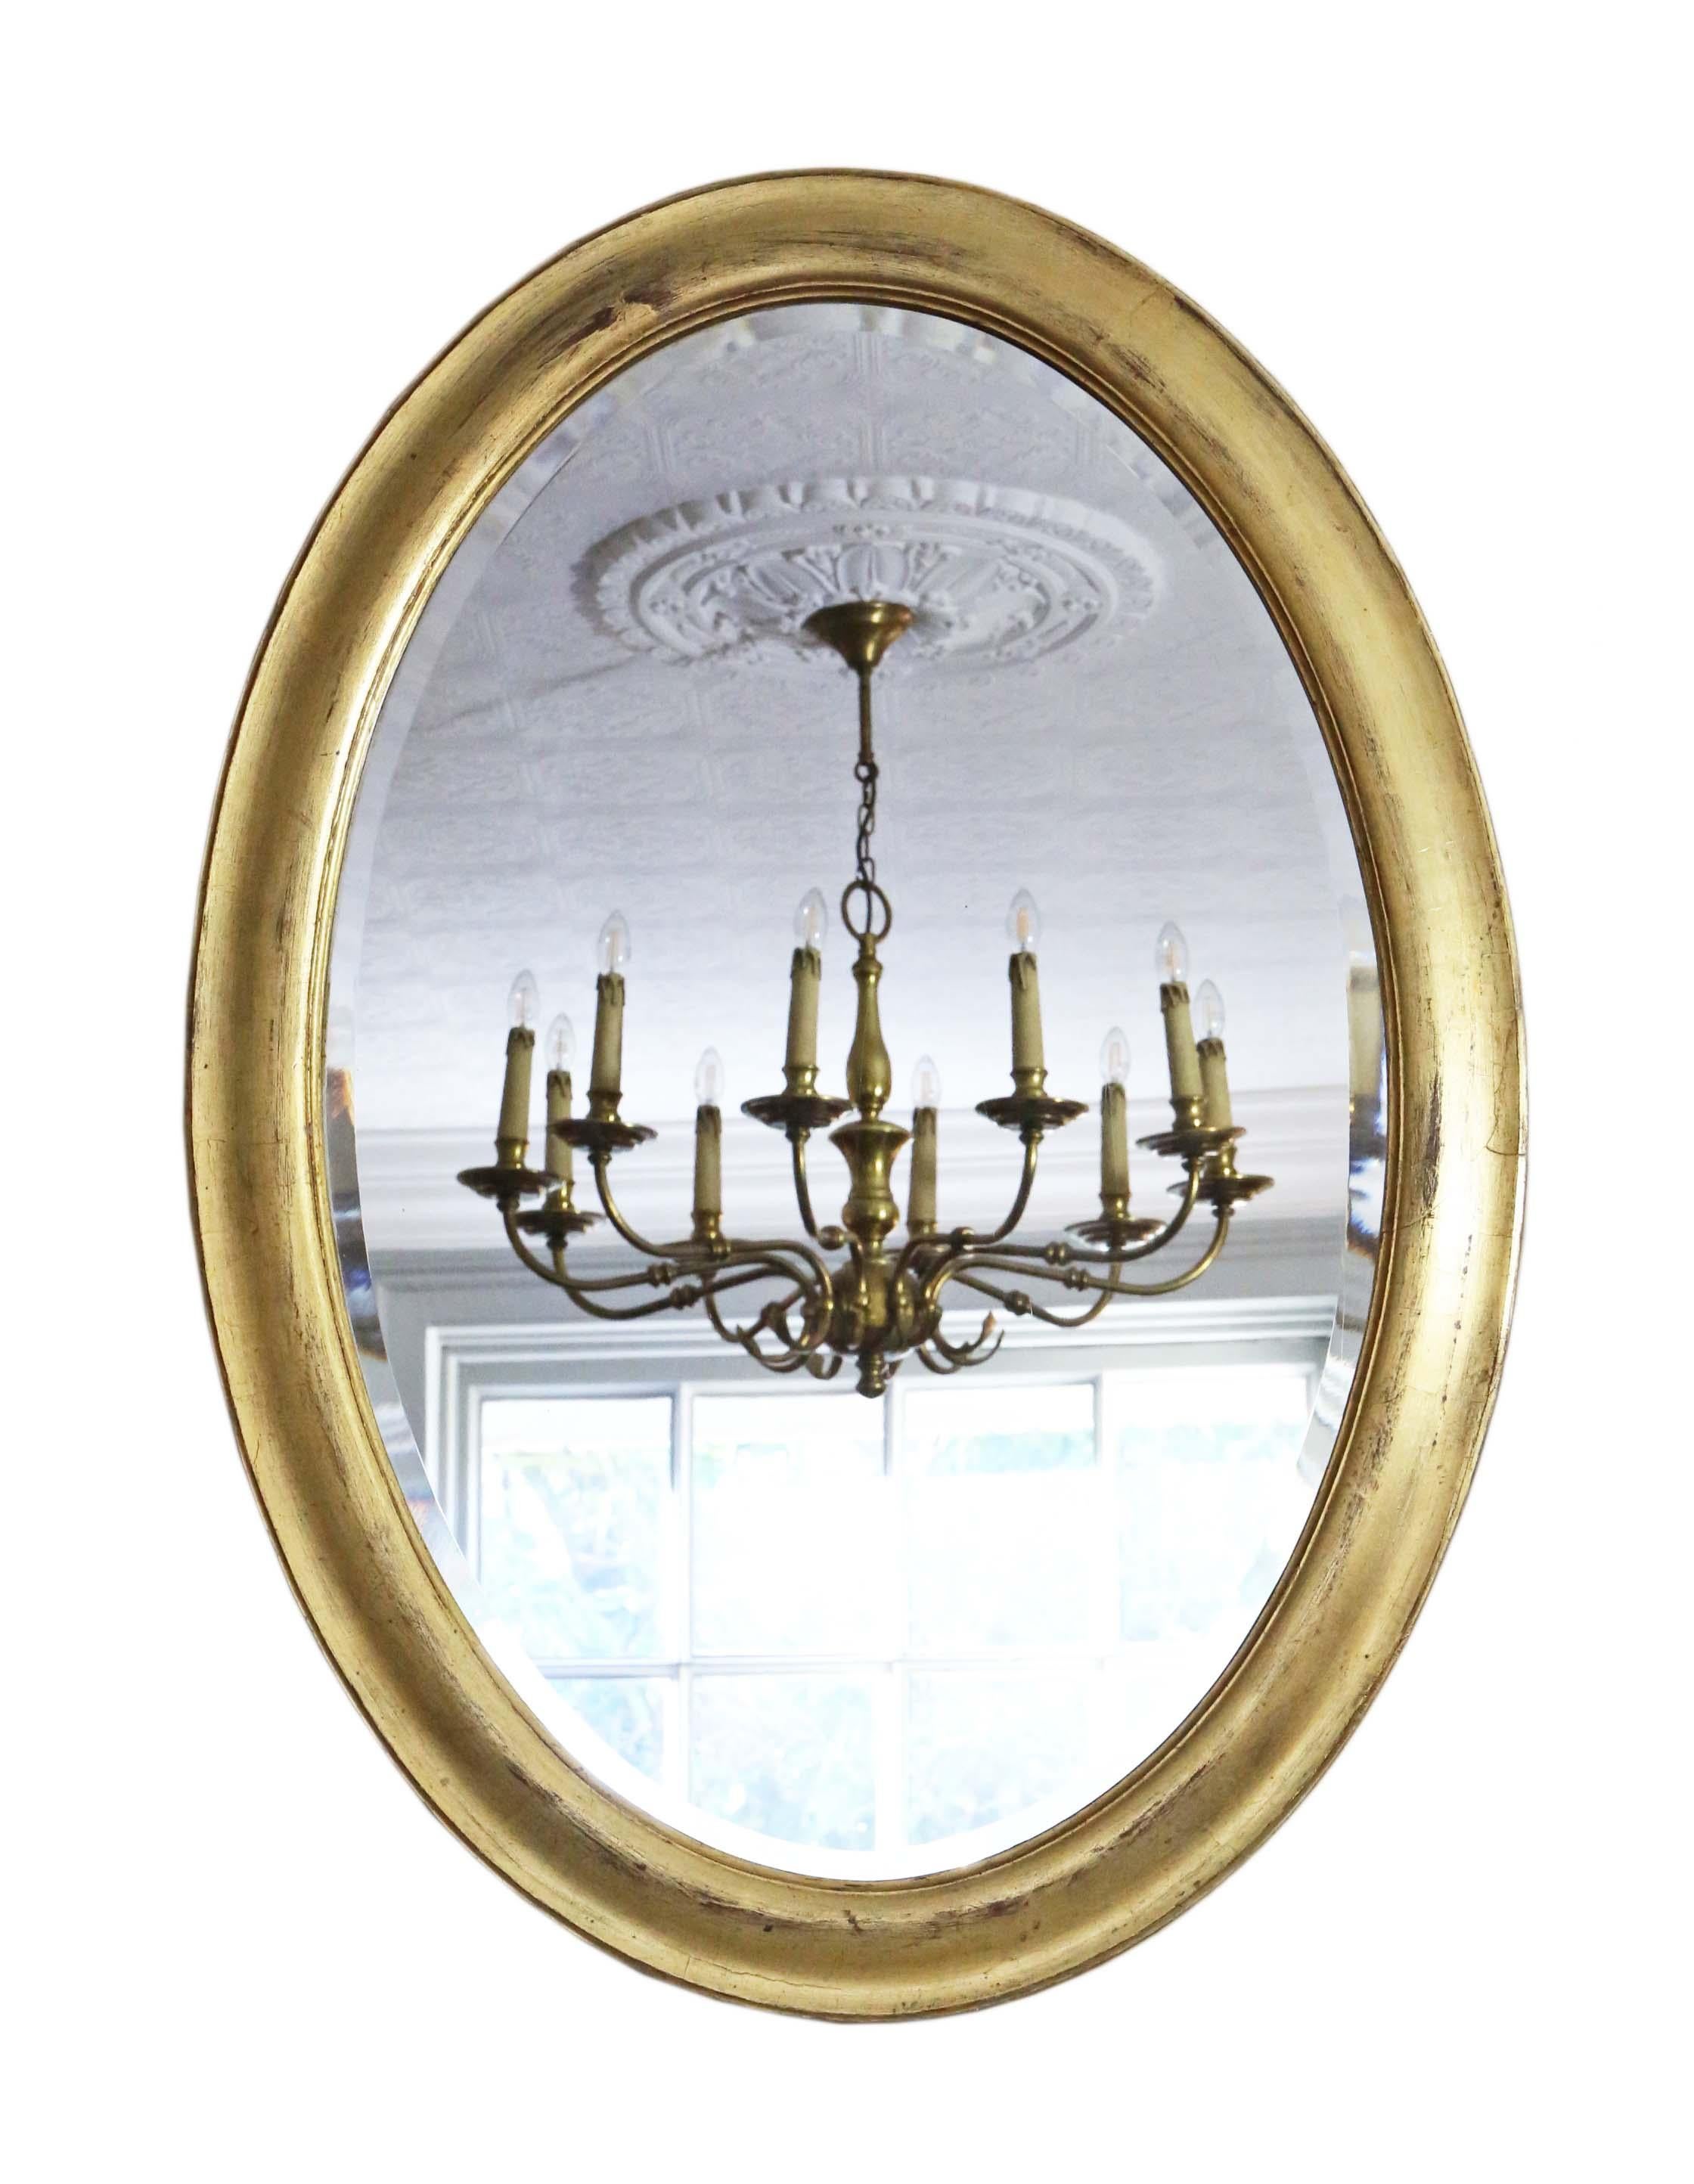 Antique large quality oval gilt wall mirror overmantle 19th Century.

An impressive rare find, that would look amazing in the right location. Could be used in portrait or landscape. No loose joints or woodworm.

The original bevel edge mirrored